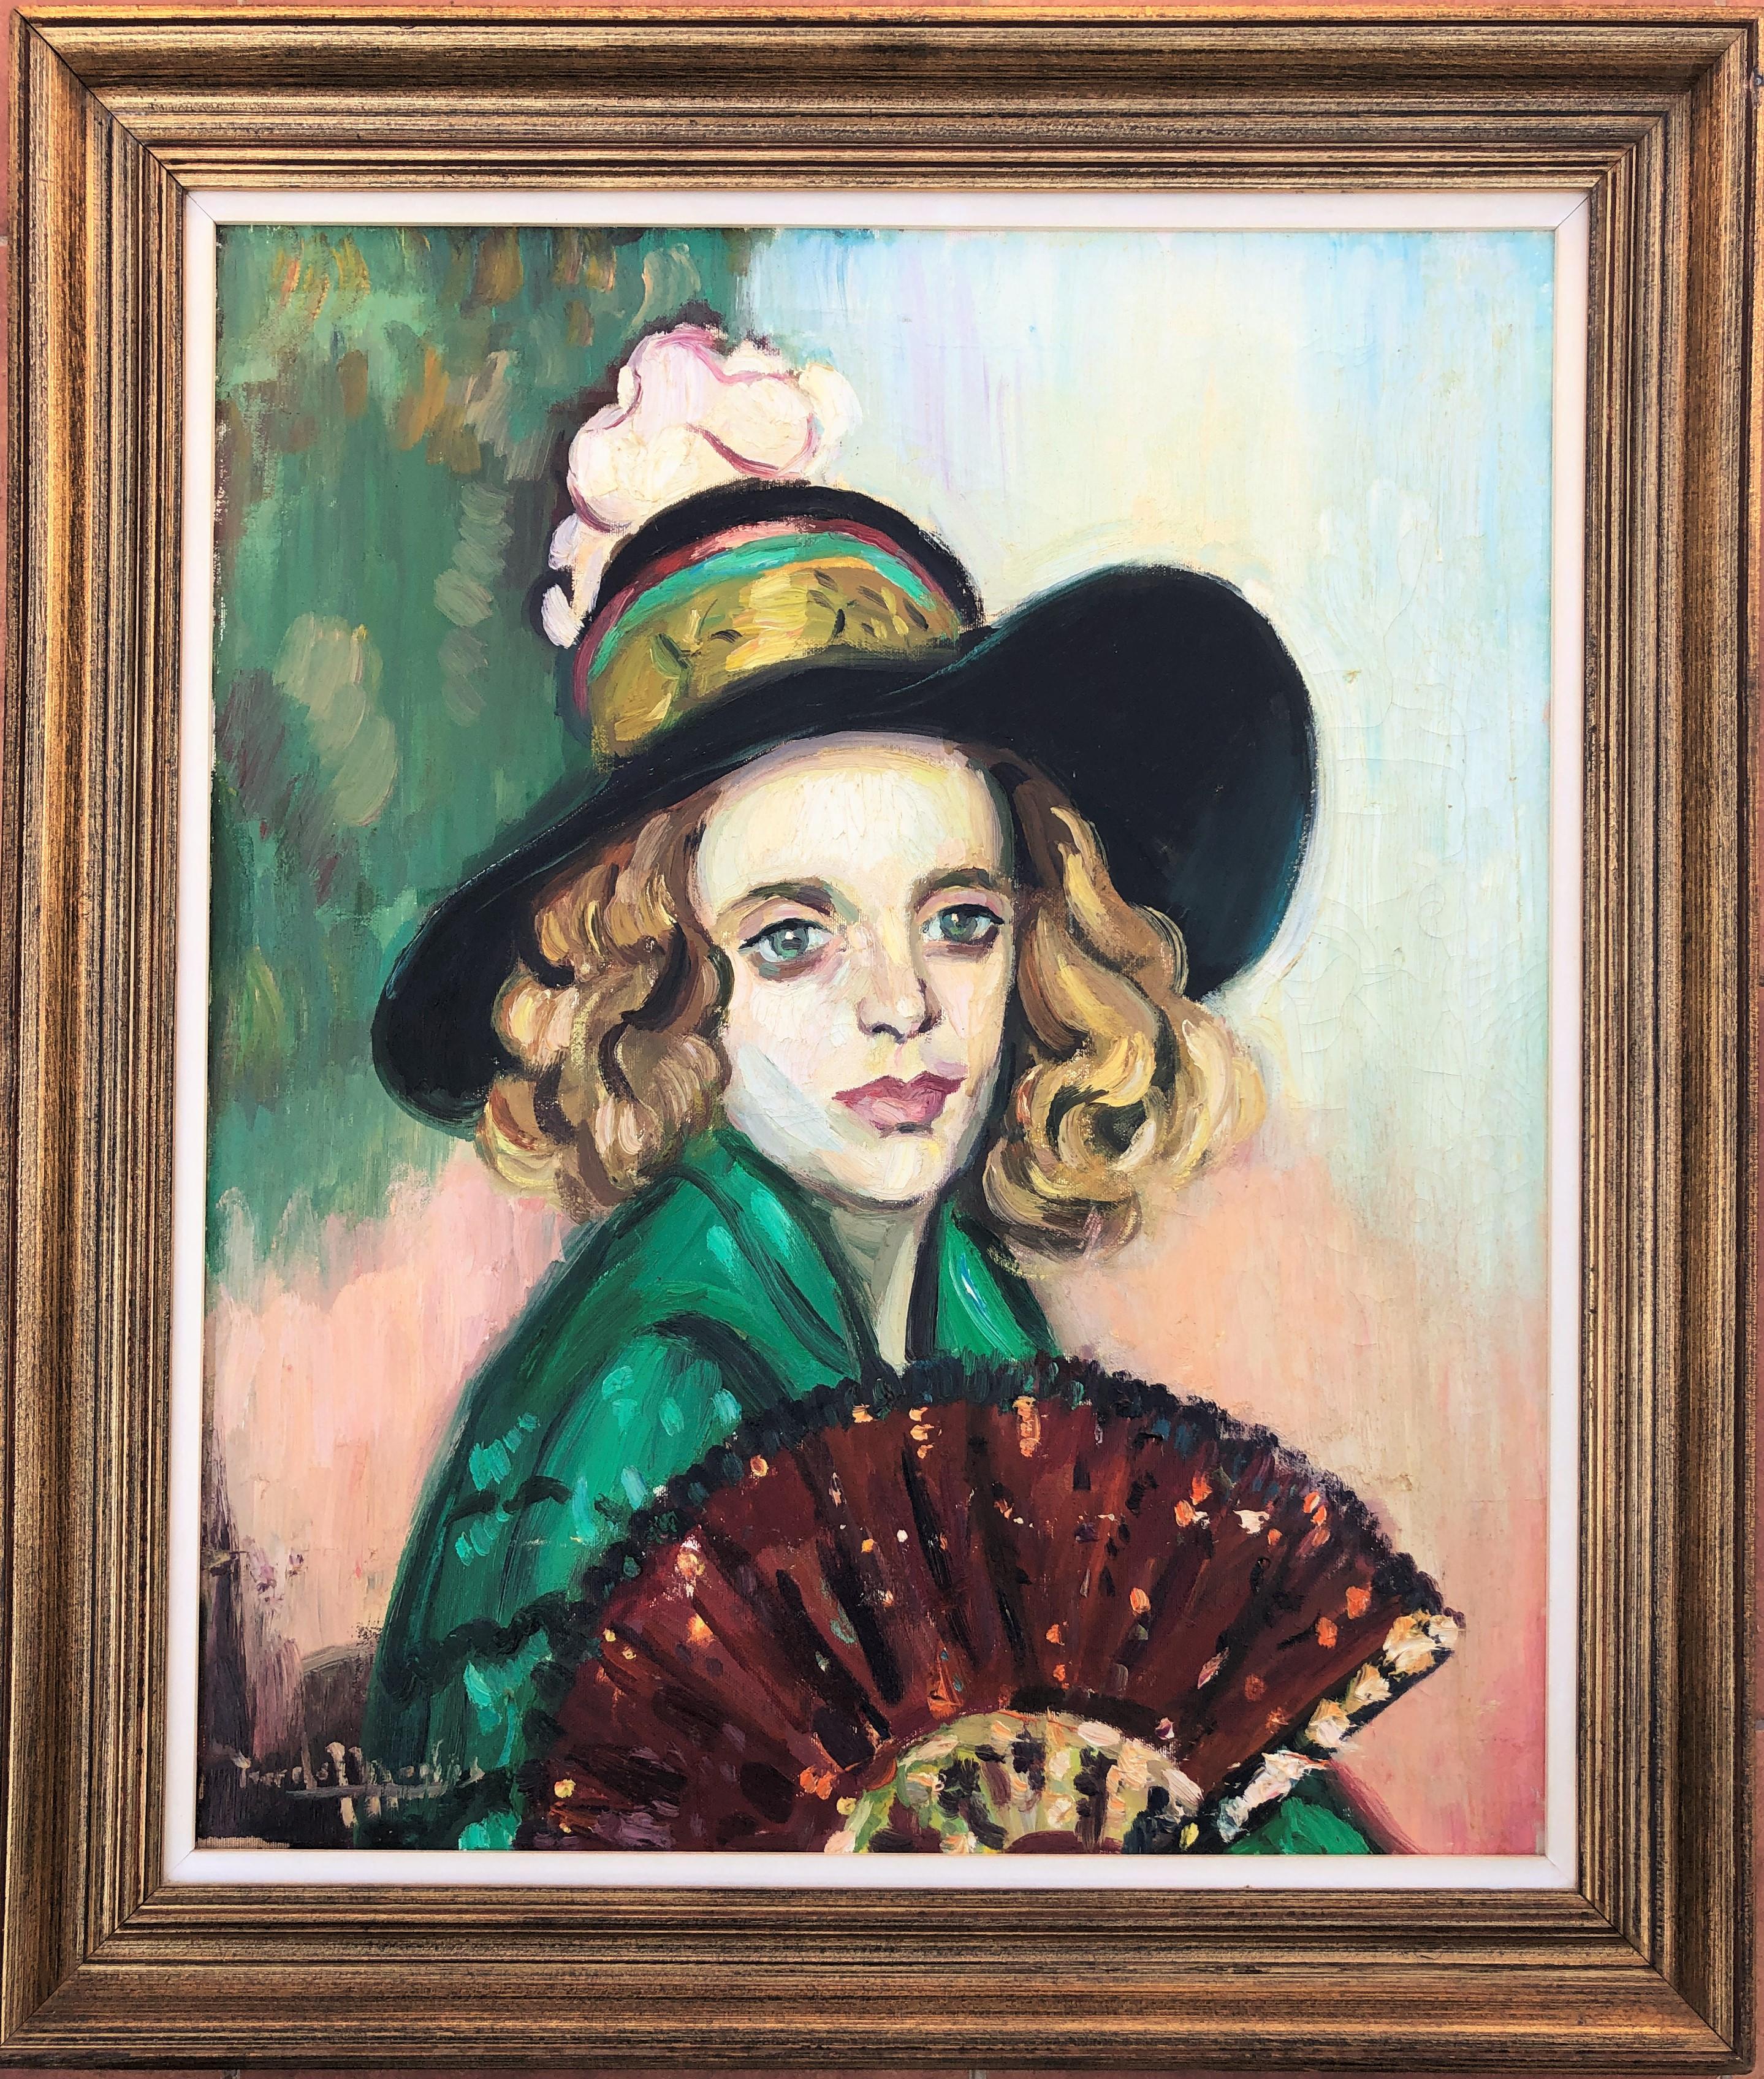 Woman with fan oil on canvas painting portrait - Painting by Mariano Tur de Montis